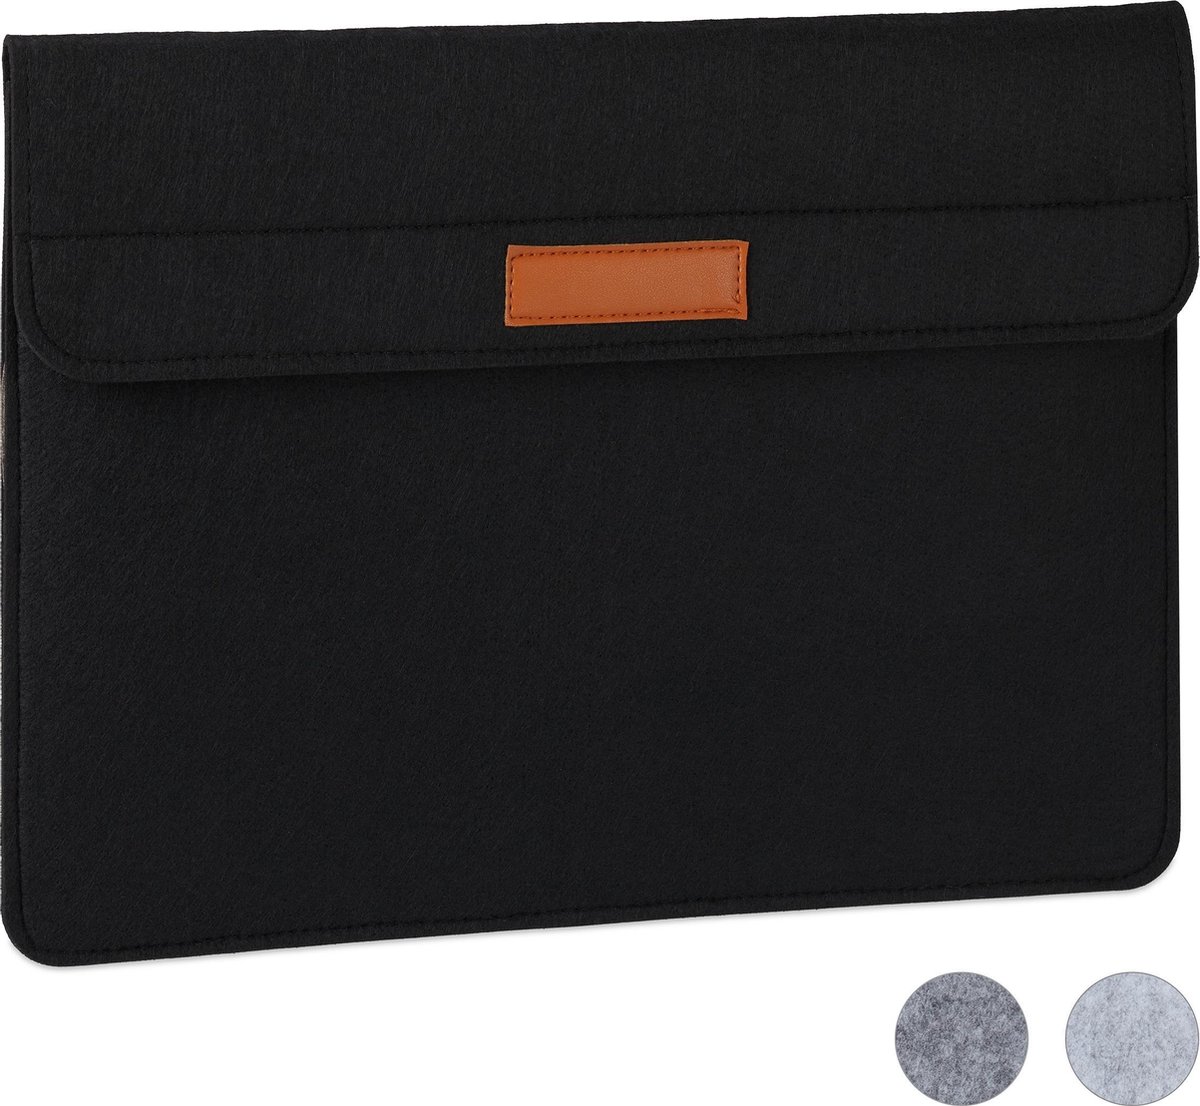 relaxdays laptophoes - 15,4 inch - laptop sleeve - laptoptas - tablethoes - beschermhoes zwart